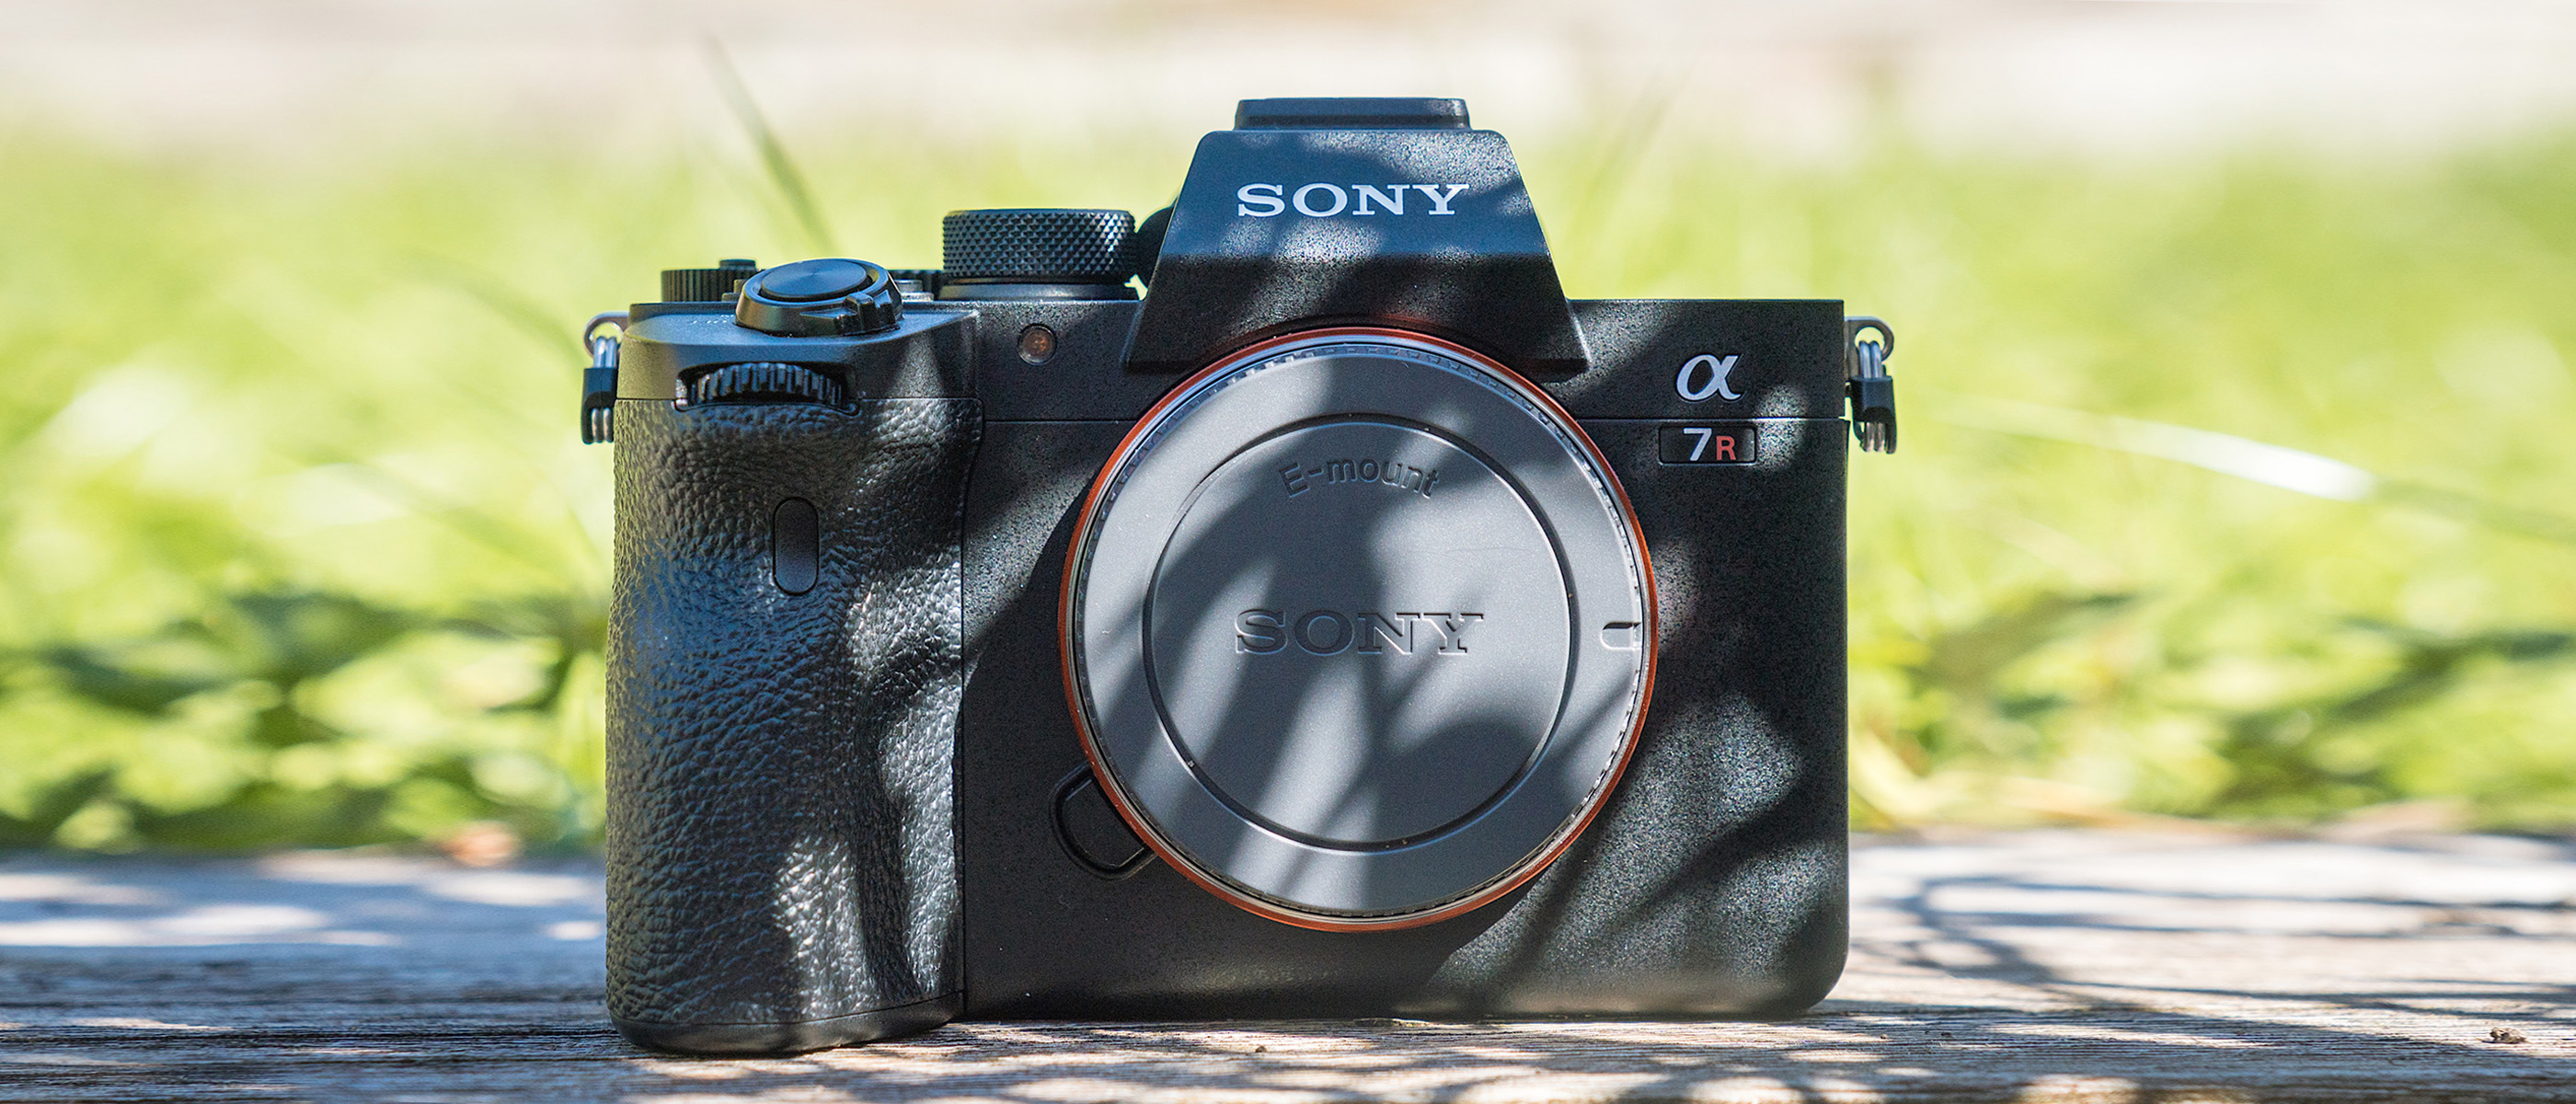 Front view of the Sony a7r iv